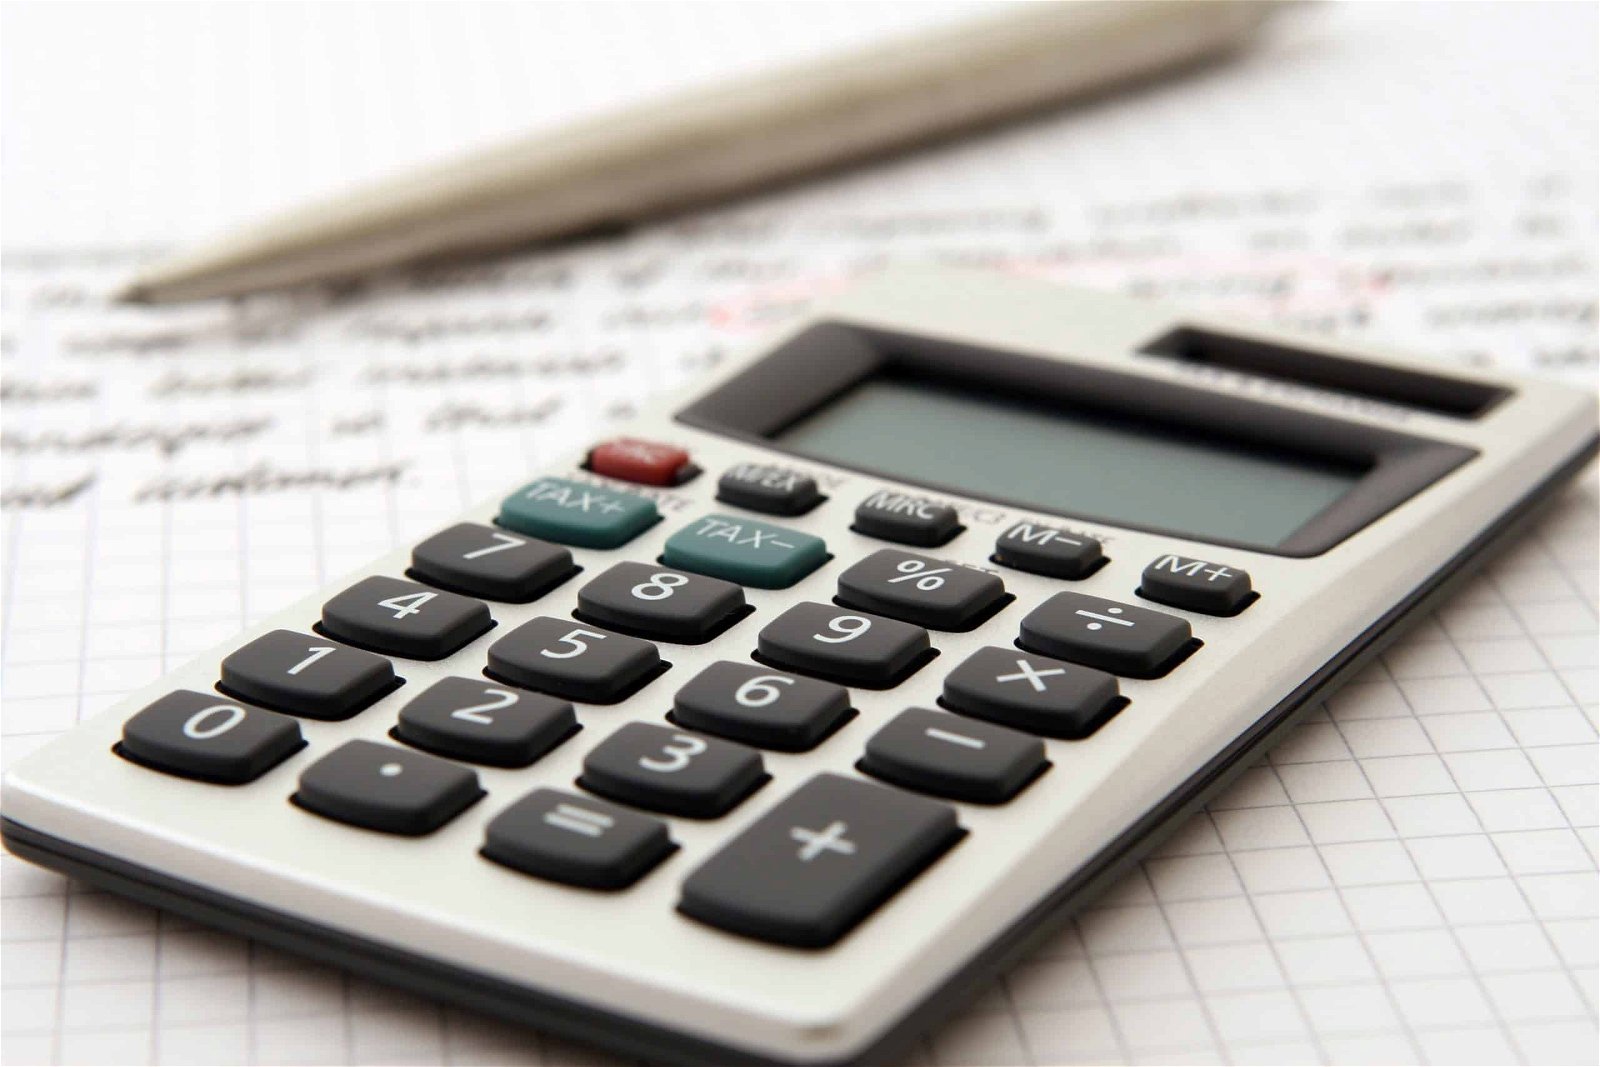 A close-up image of a calculator atop a sheet of graph paper with a pencil lying beside it, emphasizing the calculation of employee turnover rate.